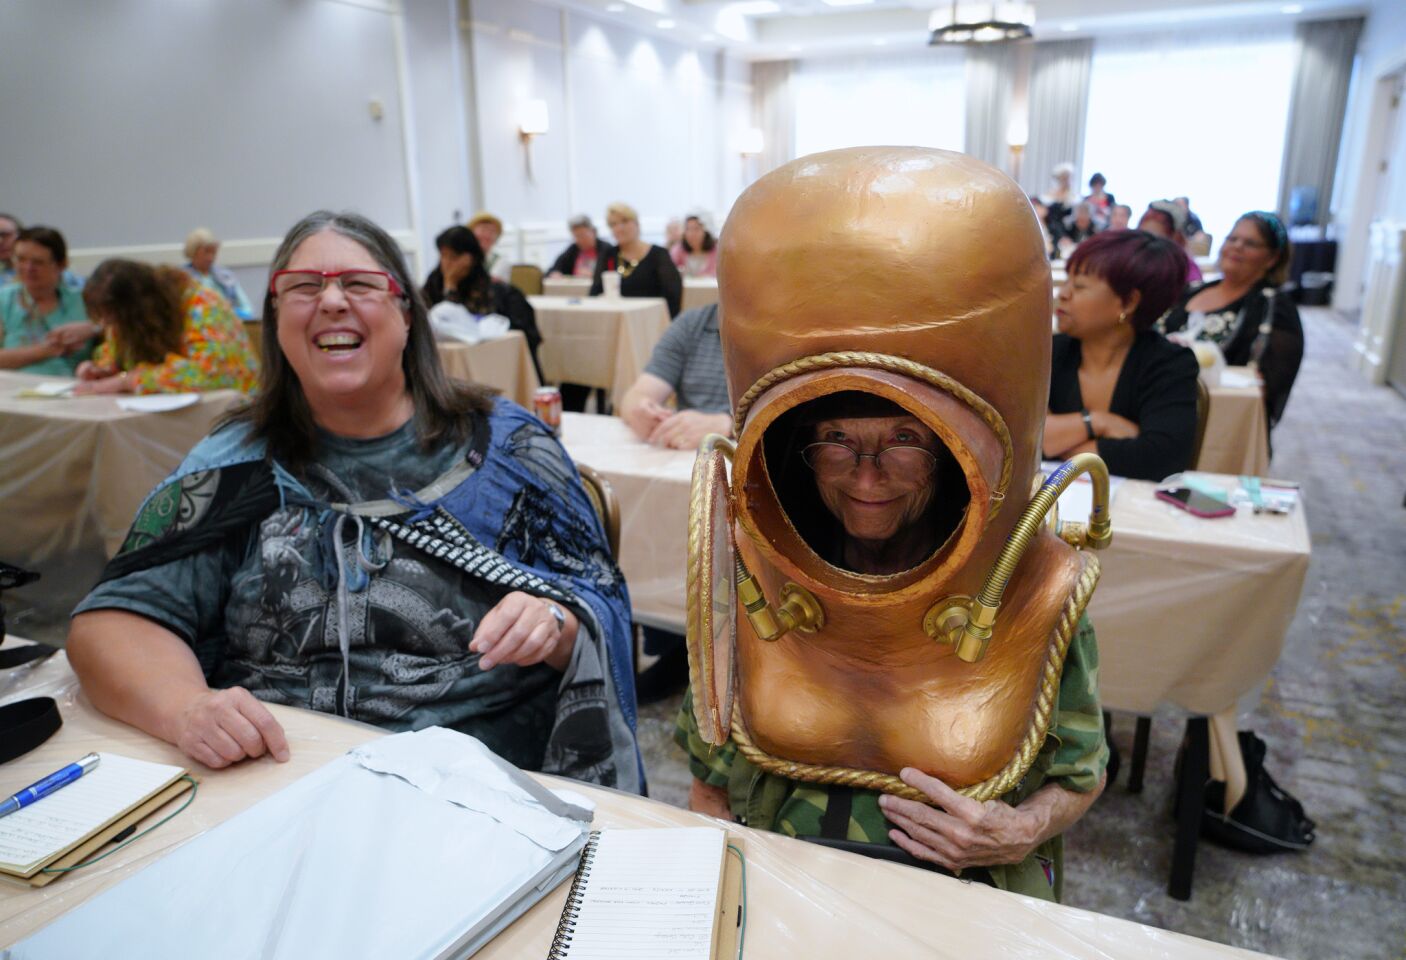 Debbie Bayliss (left) gets big laugh out of Penny Buchanan trying out one of the costume samples during a costume creation workshop held at Costume-Con 2018 in Mission Valley.